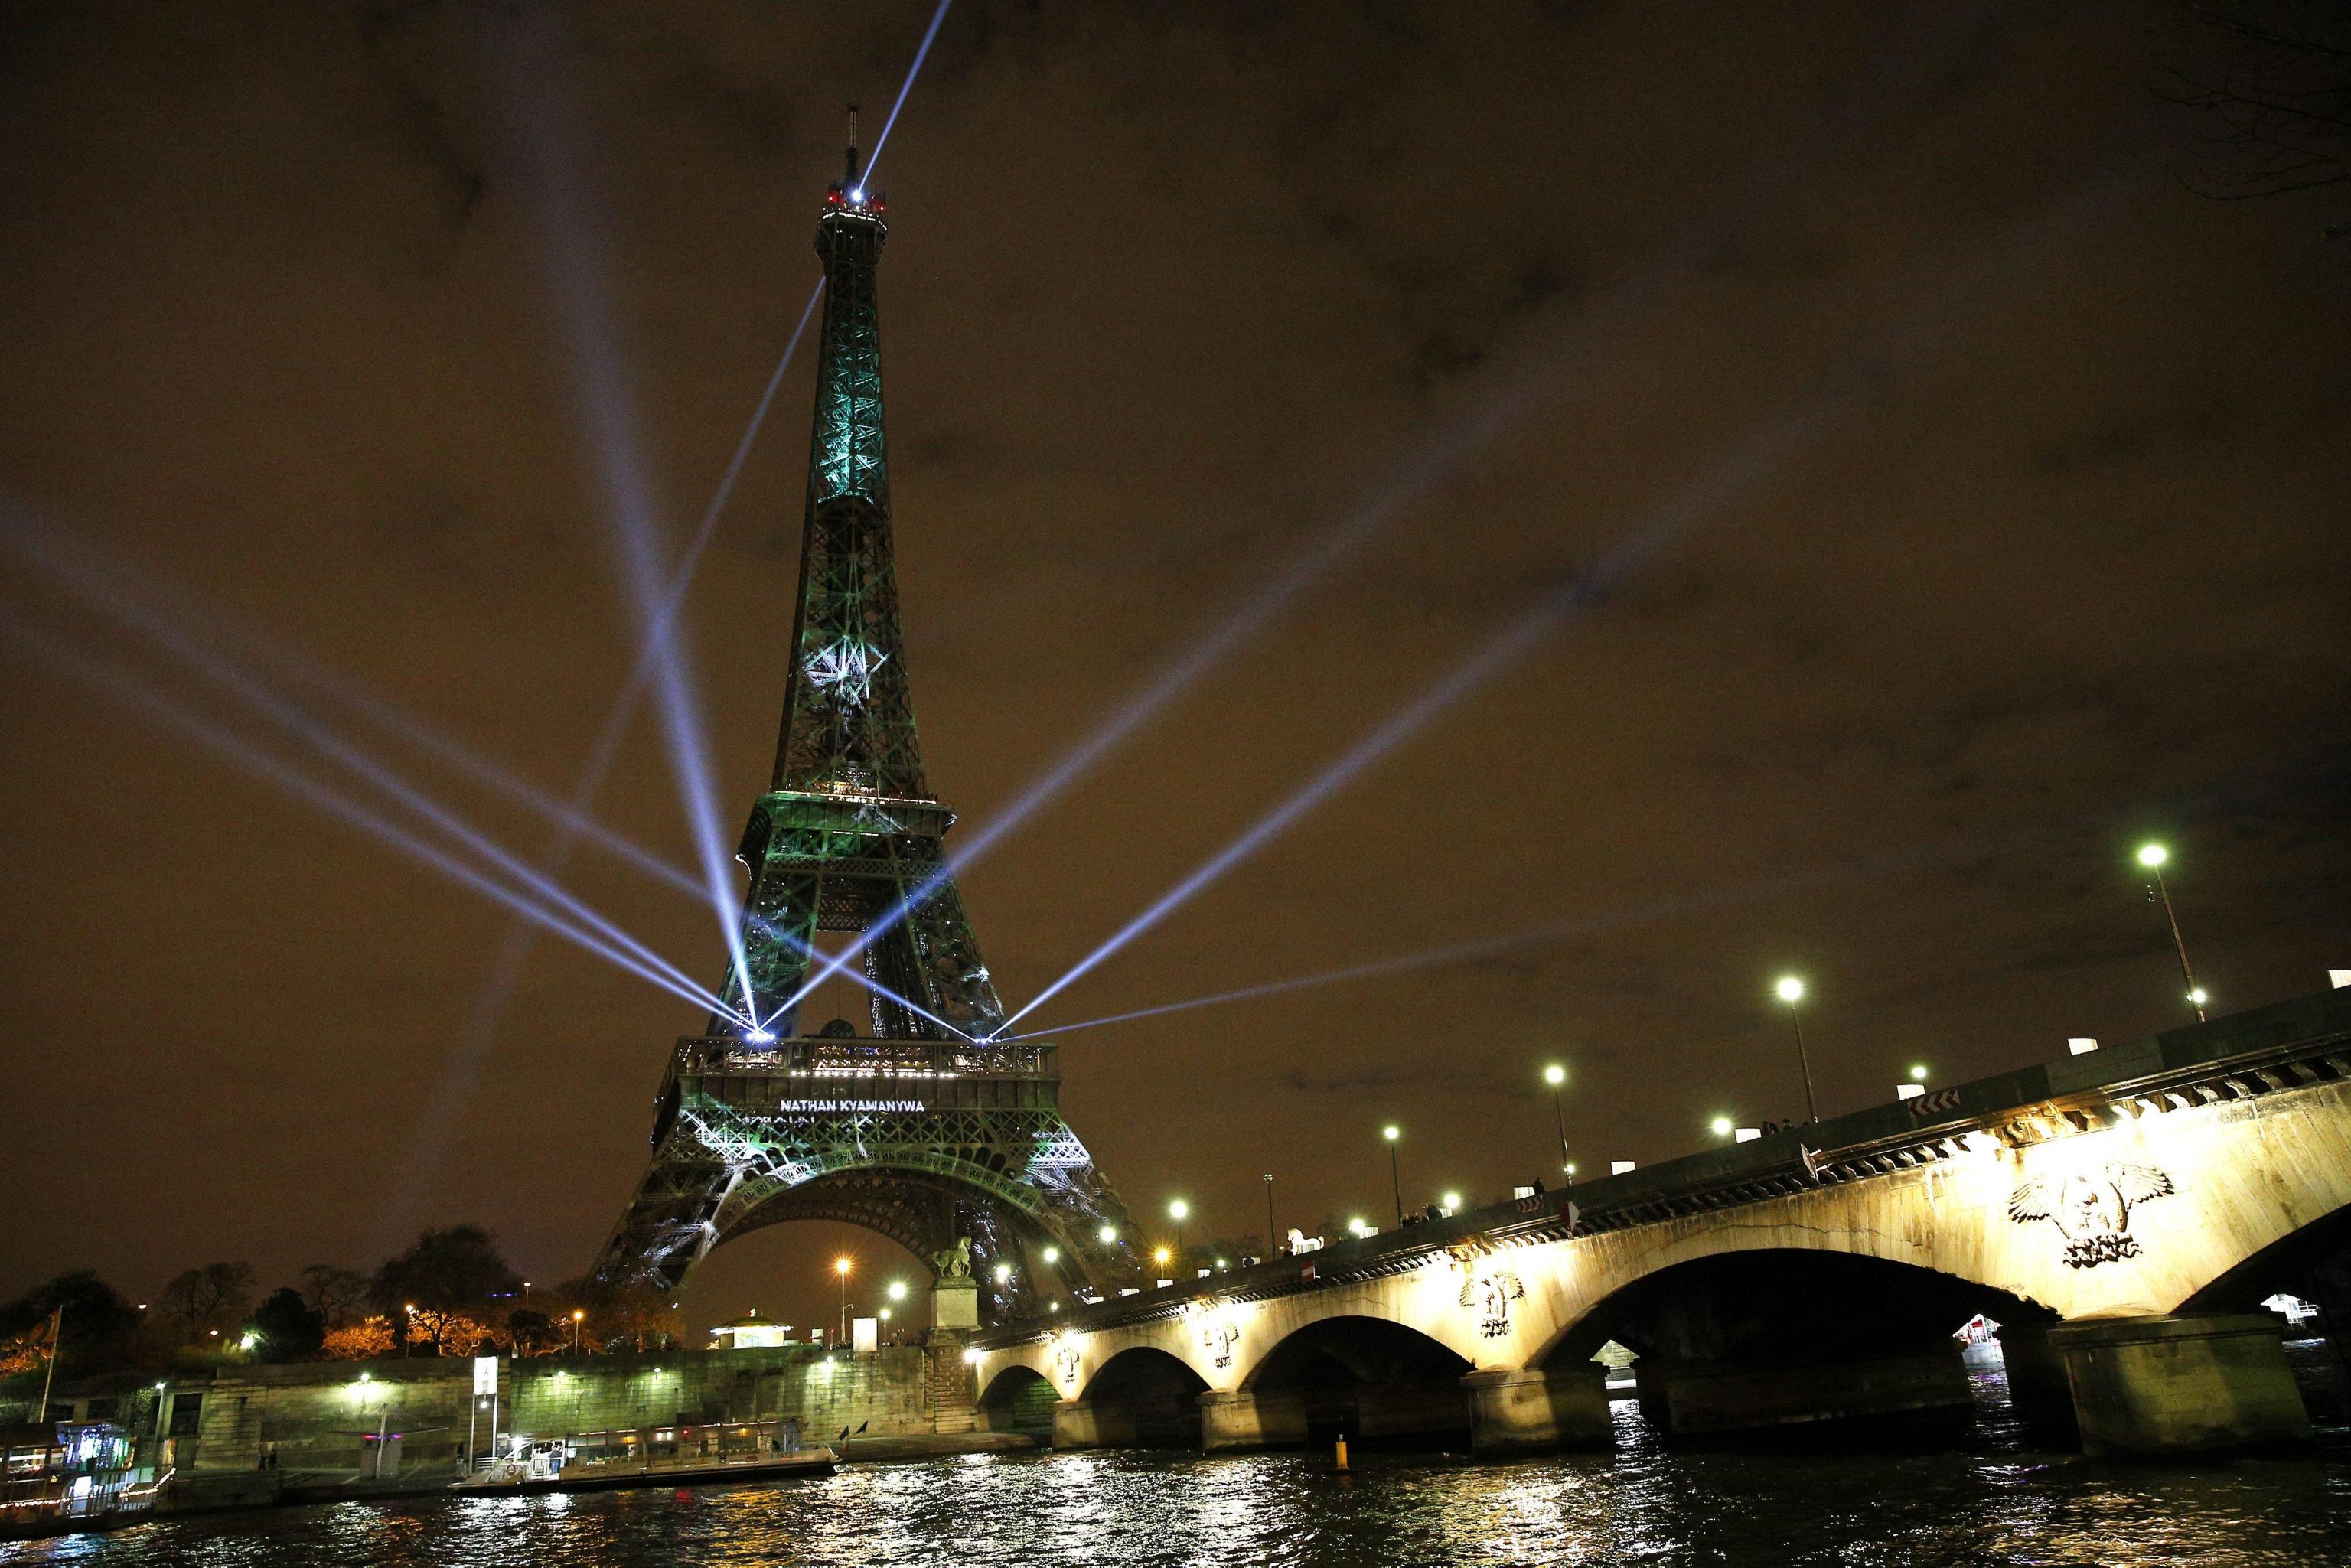 The Eiffel Tower lights up with colors and messages of hope on the eve of the COP21 climate conference in Paris